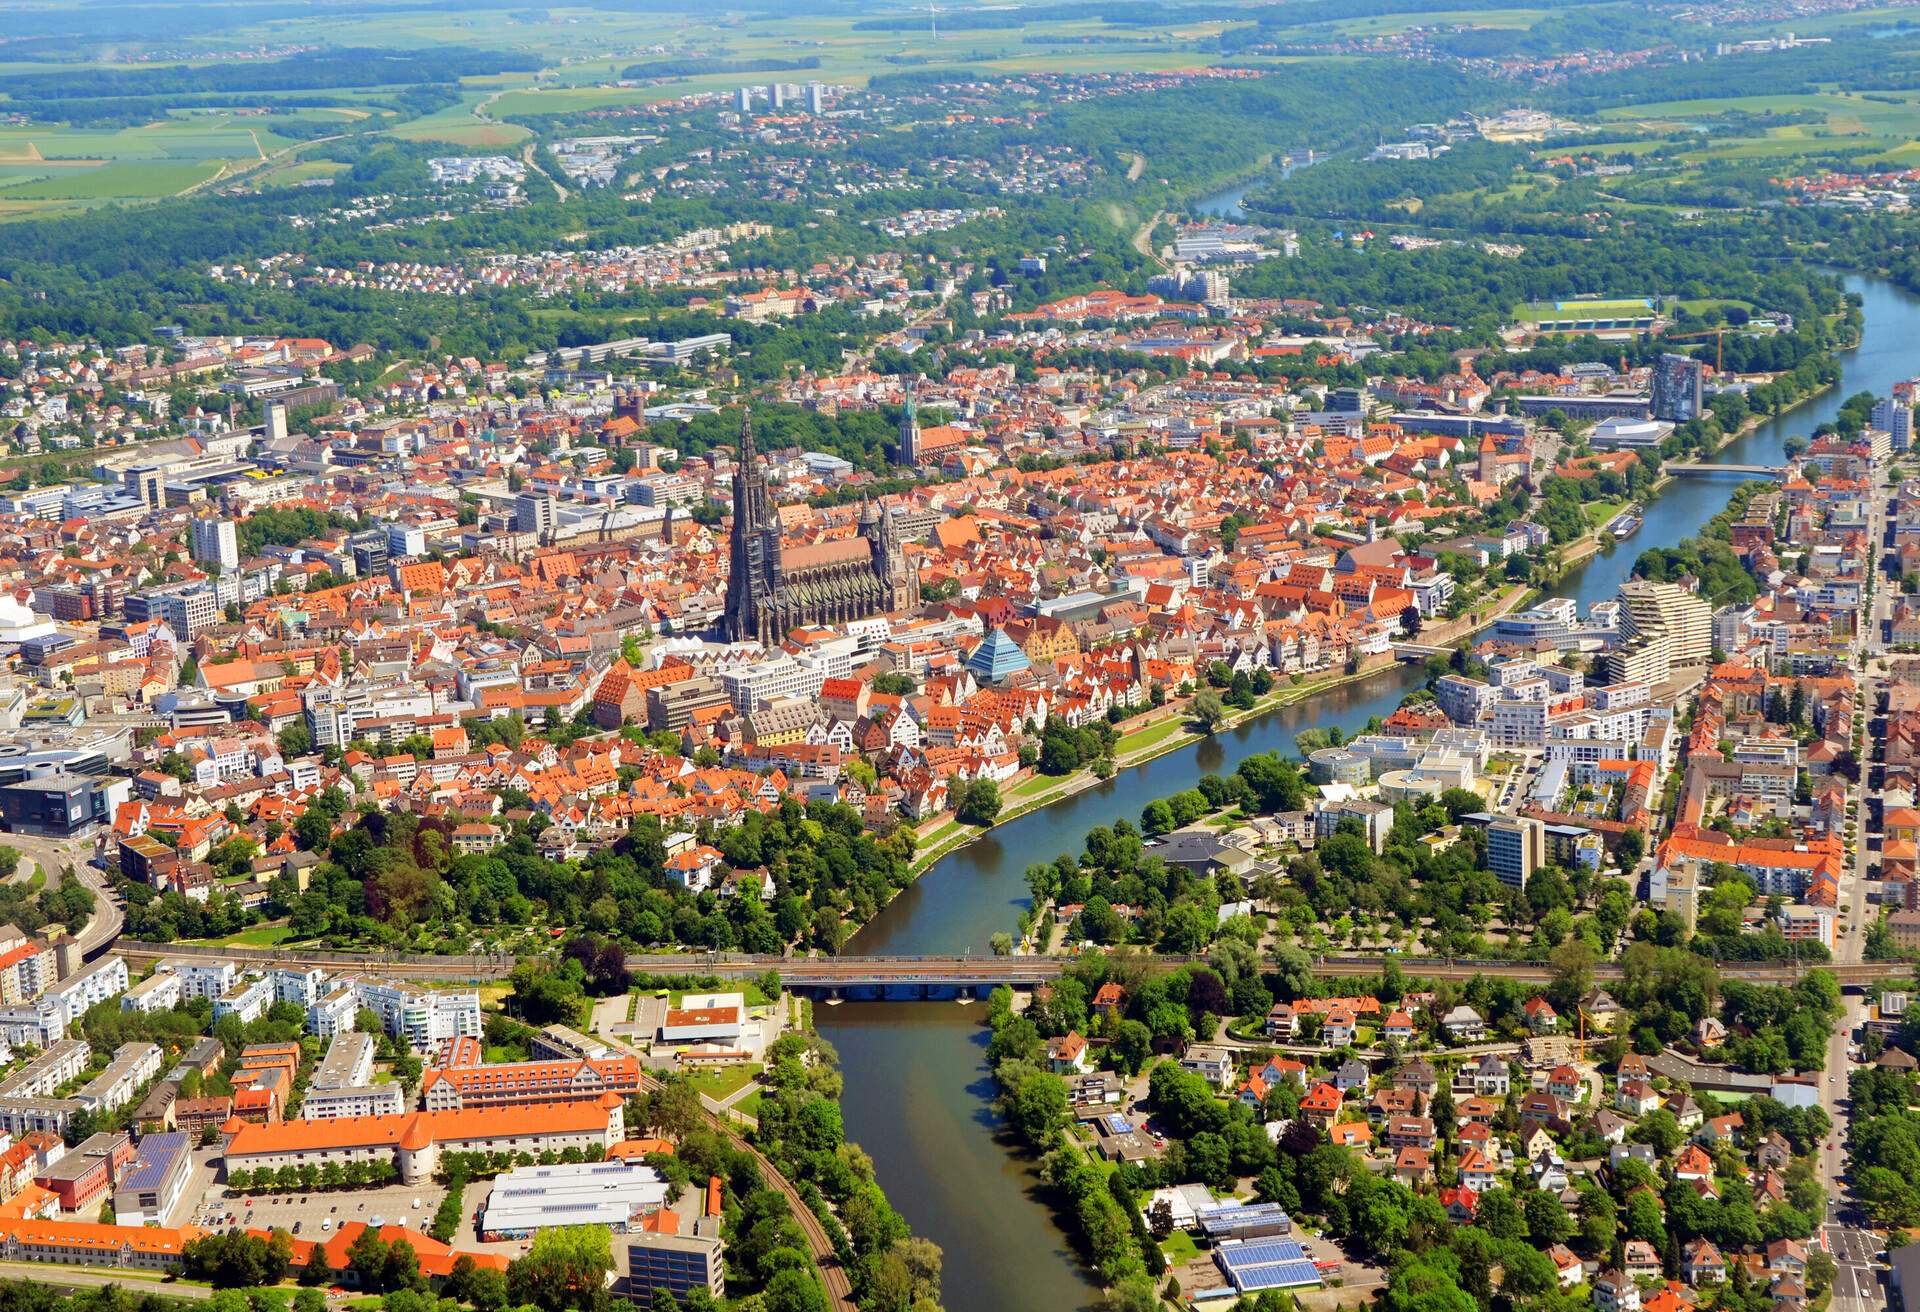 Panorama of a city in South Germany